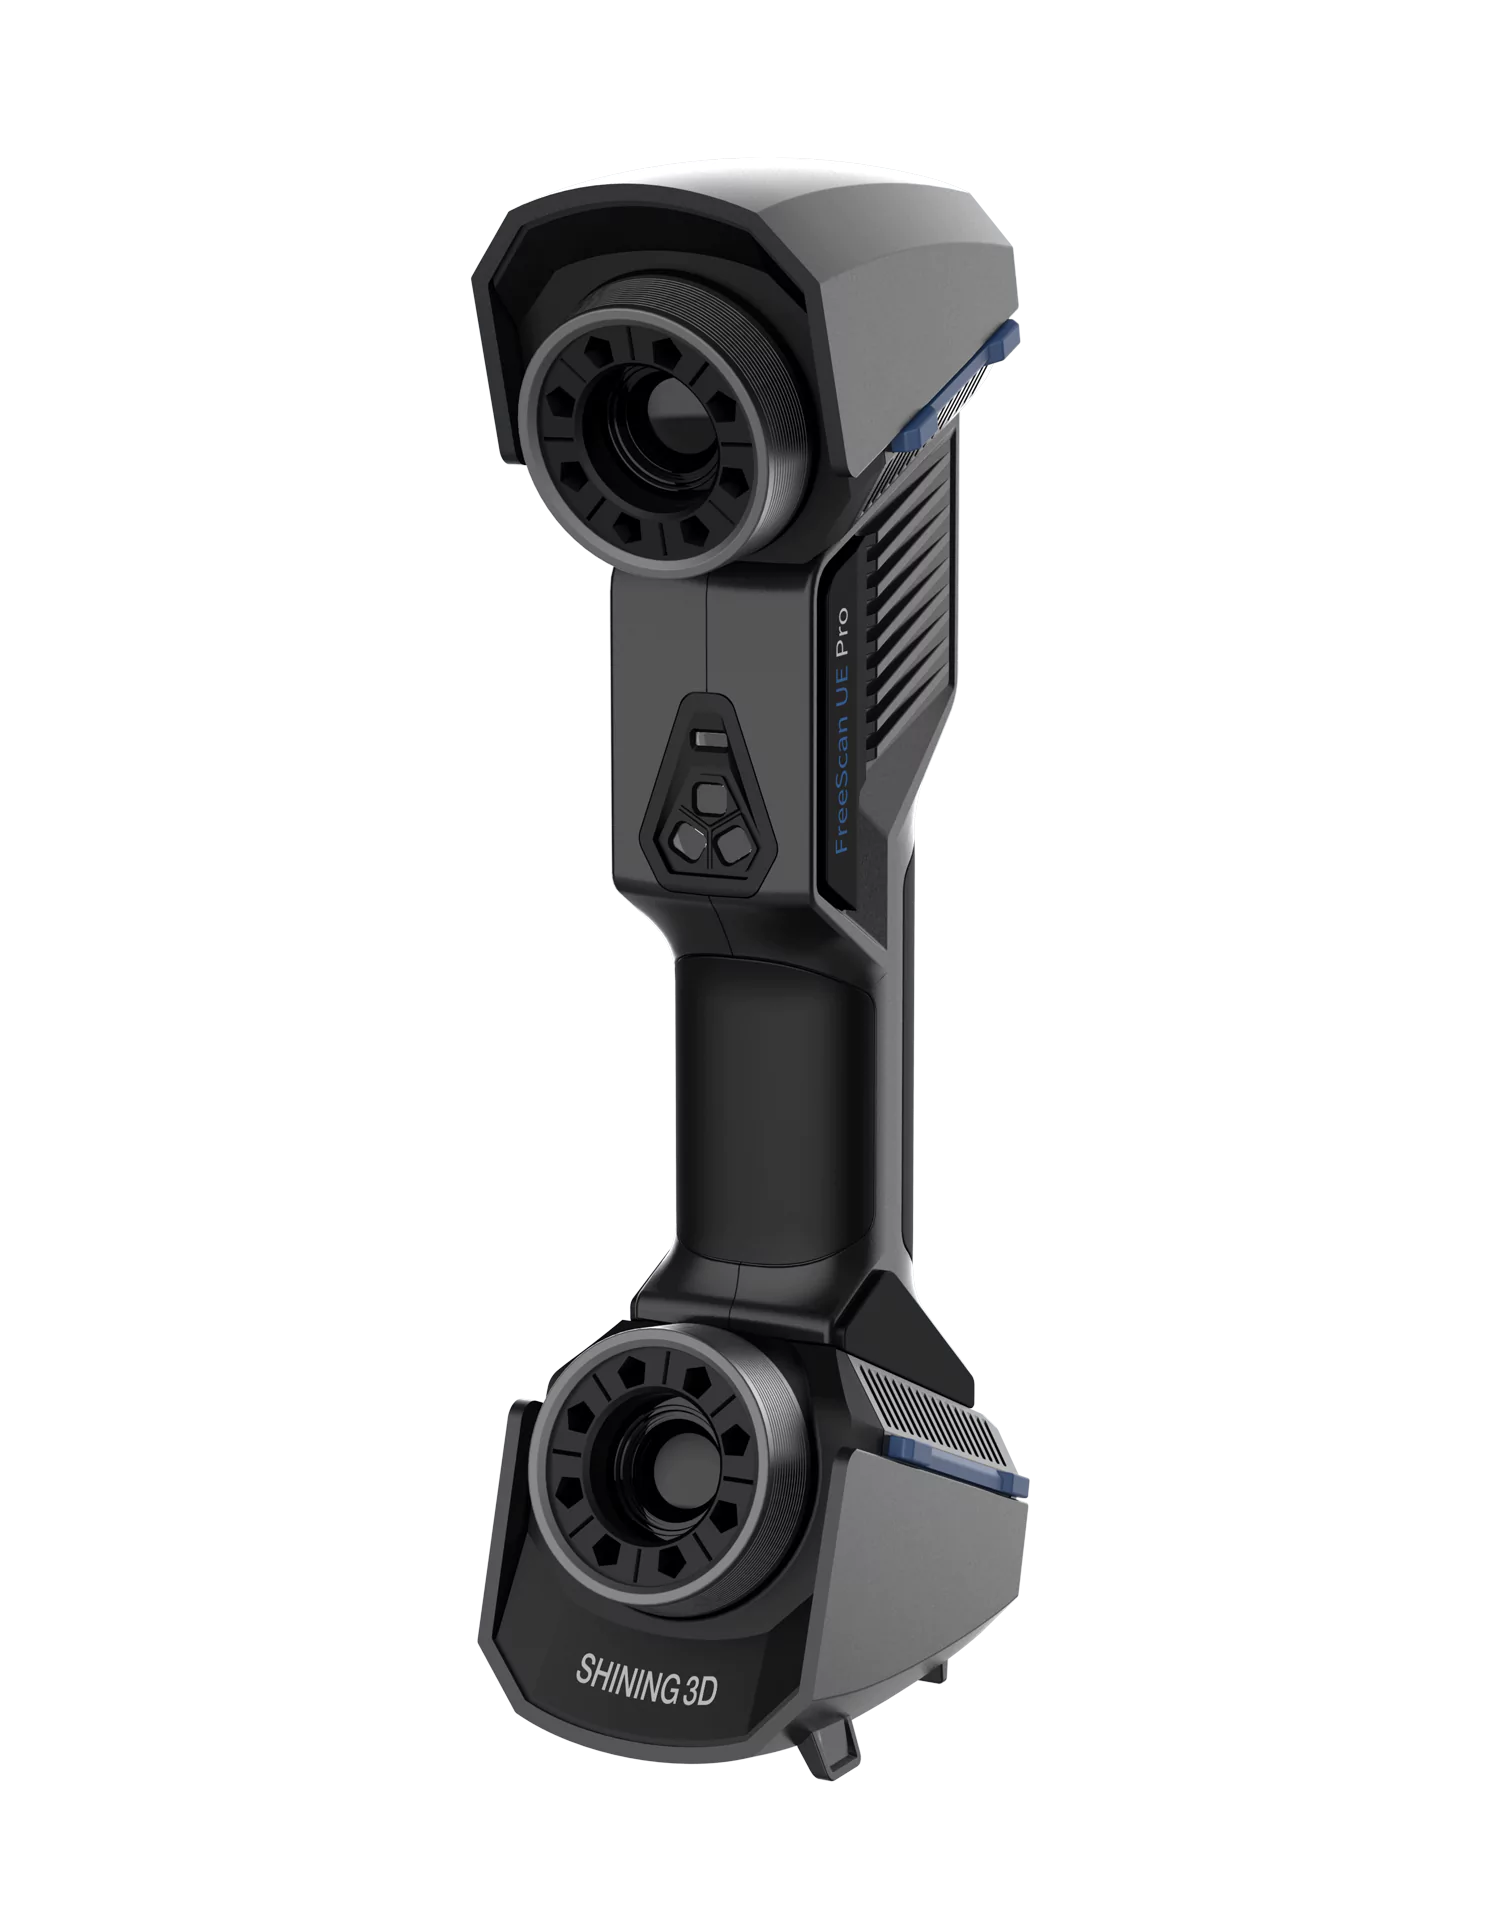 FreeScan UE Pro 3D Scanner technical specifications